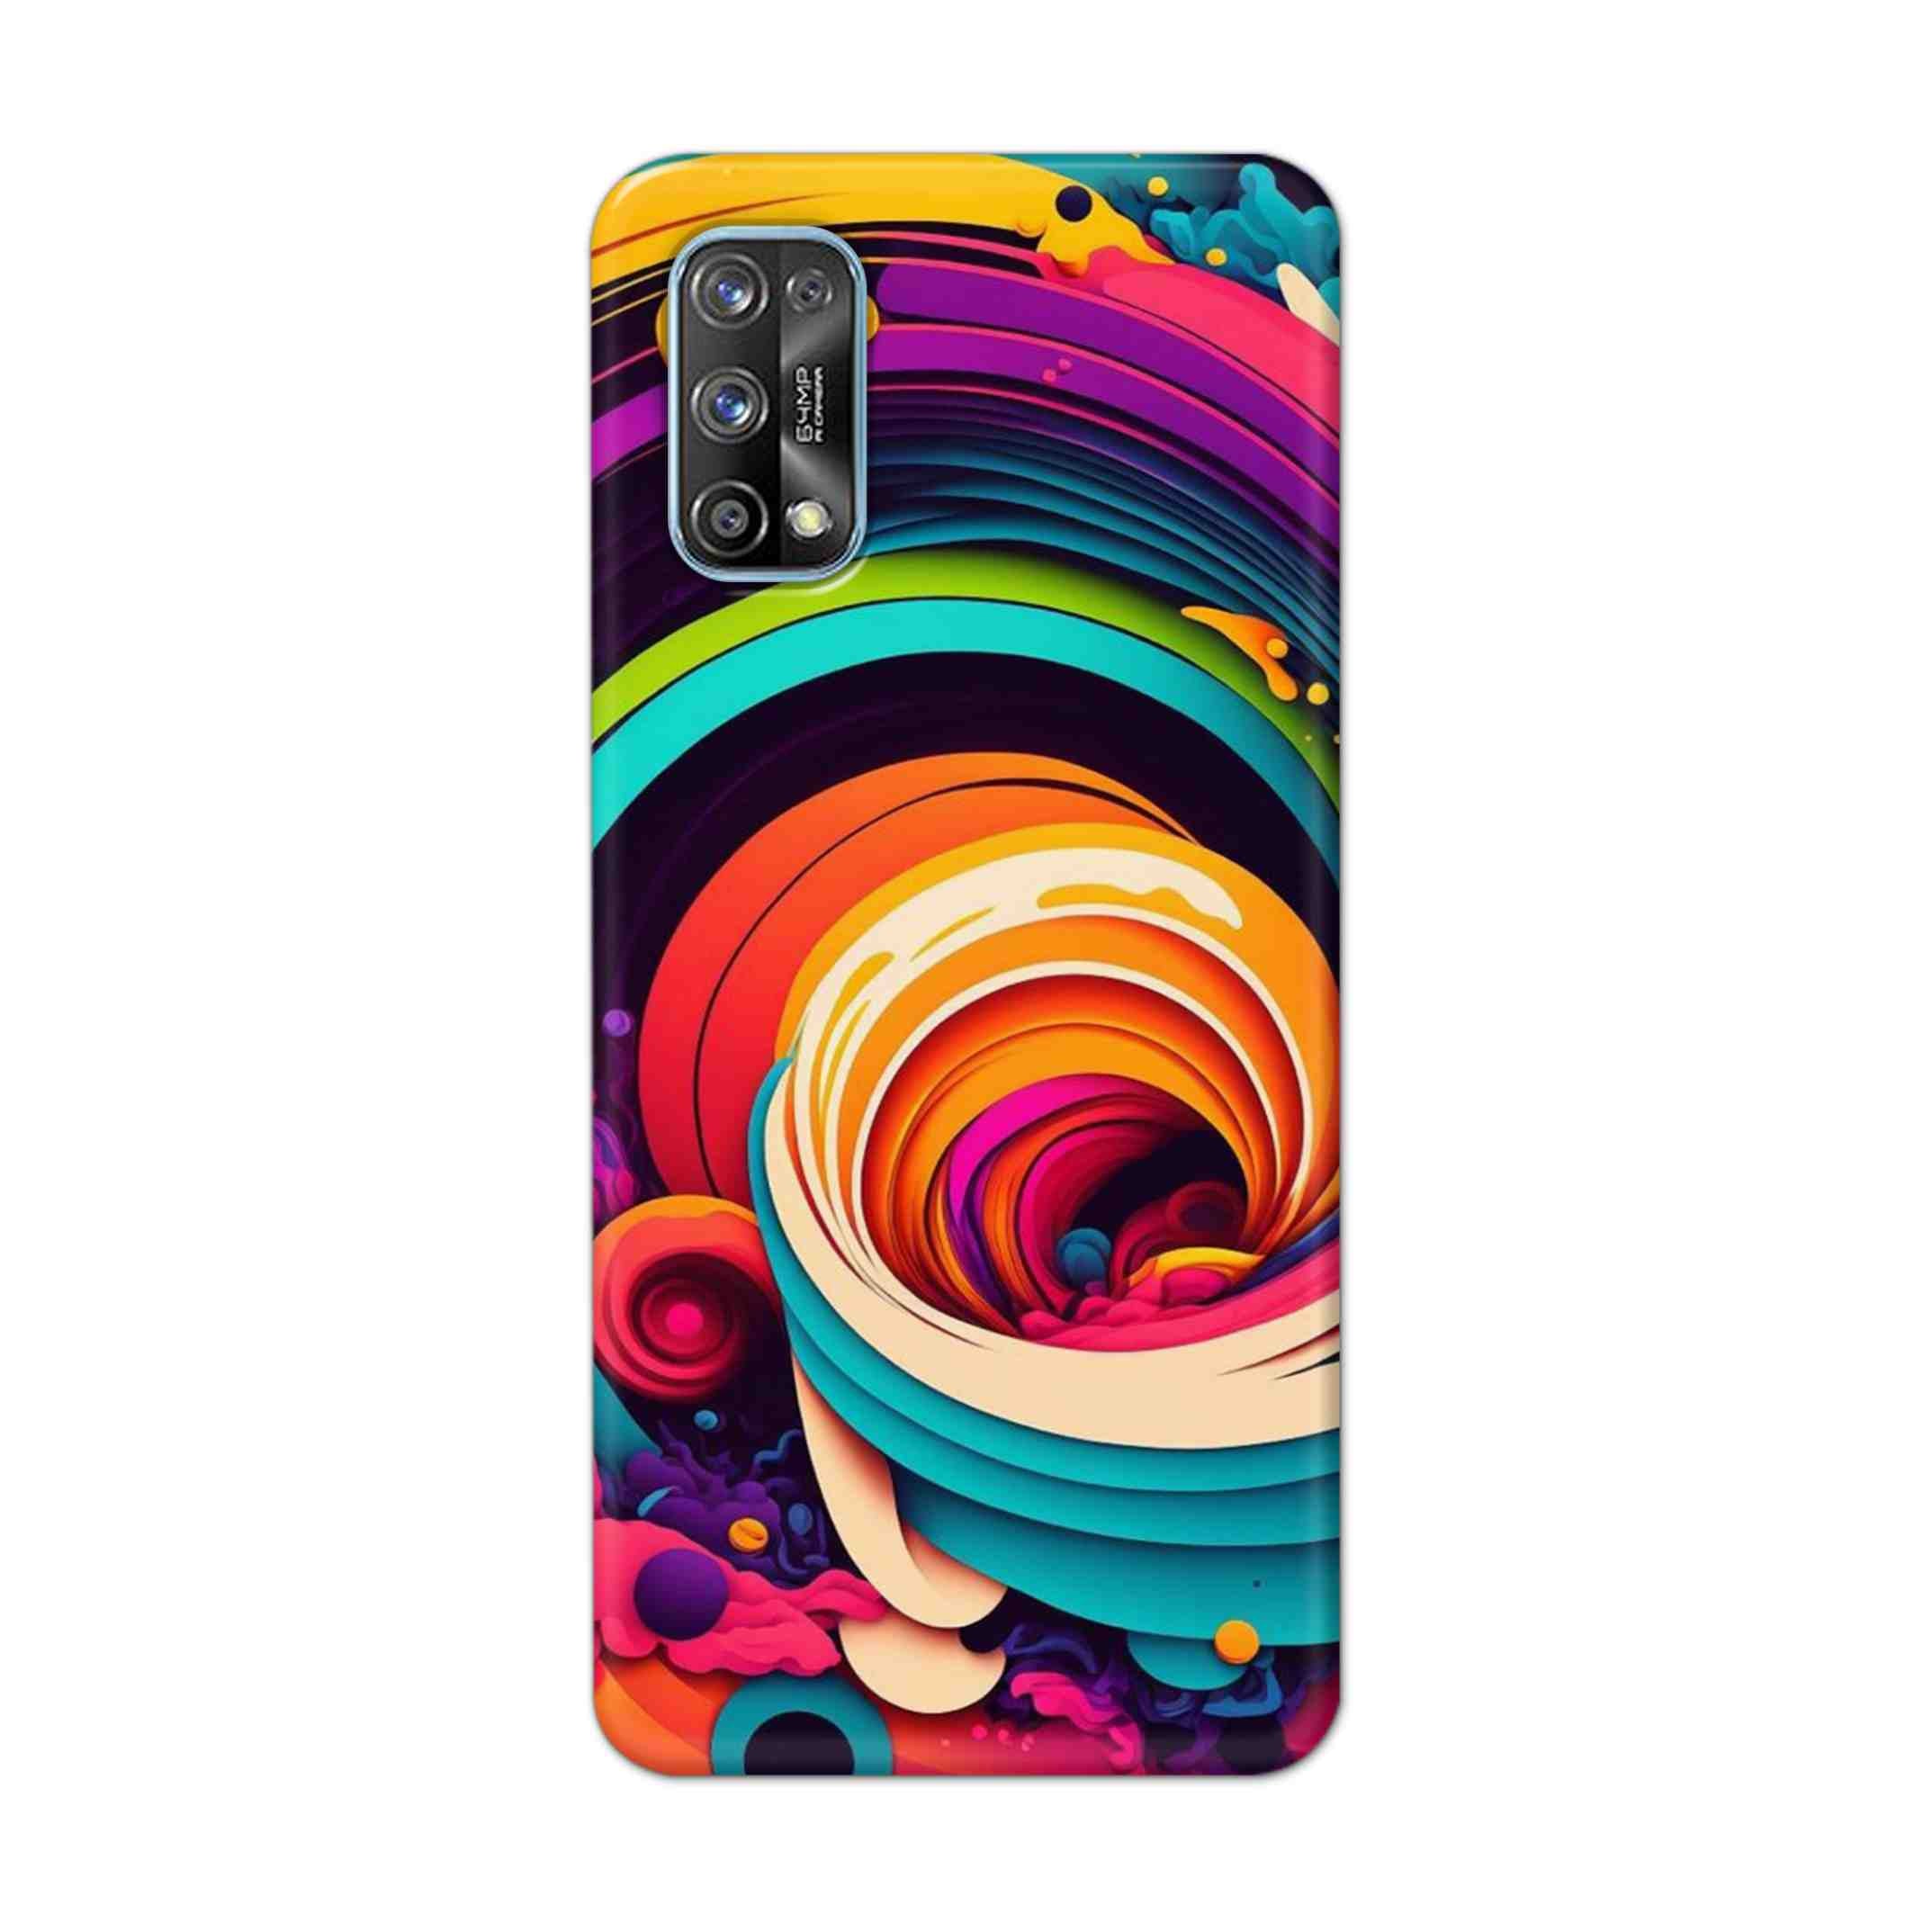 Buy Colour Circle Hard Back Mobile Phone Case Cover For Realme 7 Pro Online